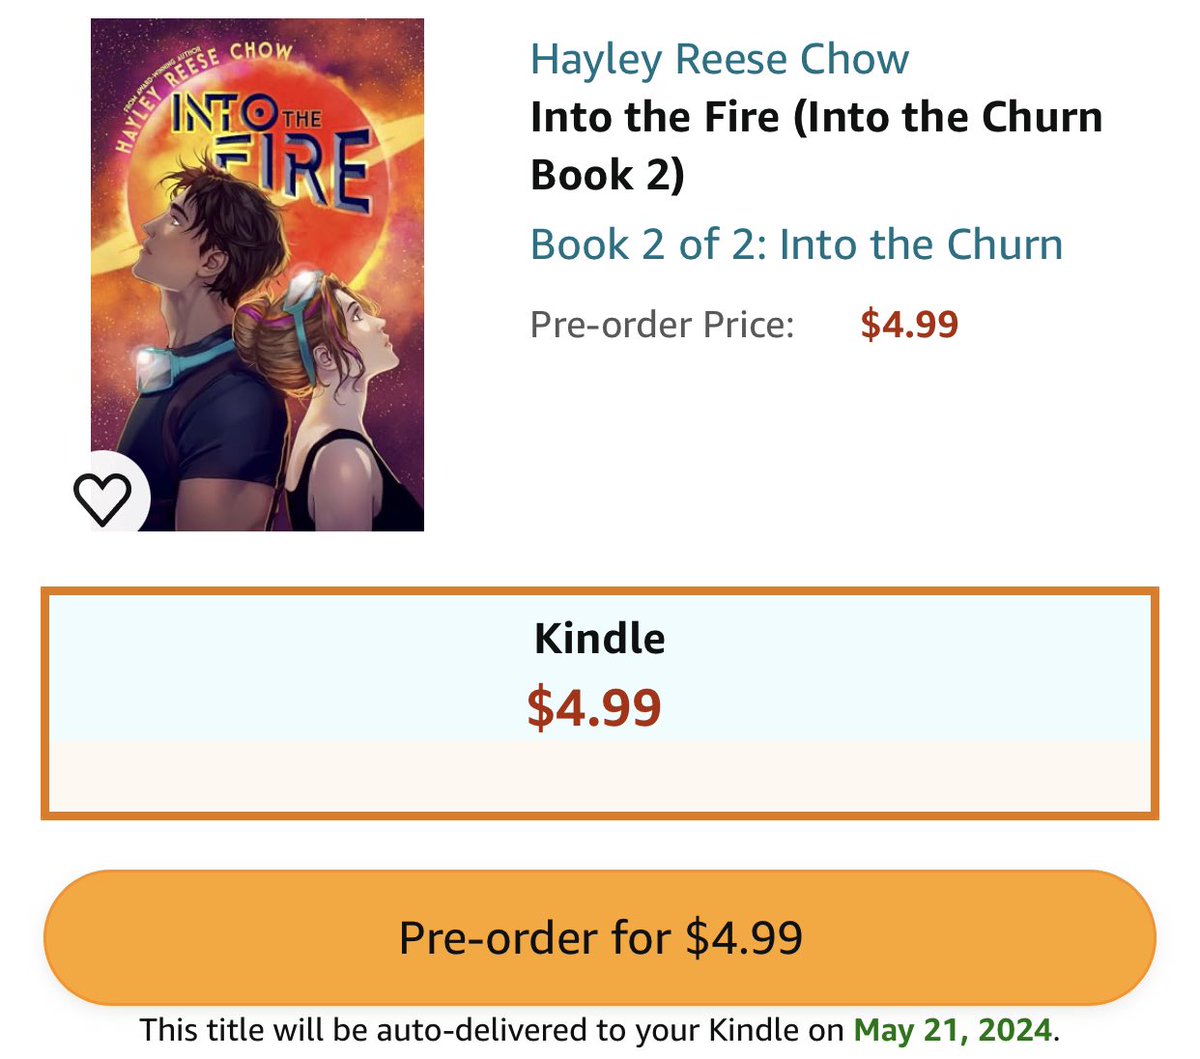 Currently at 112 Into the Fire preorders out of the 300 we need to get a book 3. Not sure if we’ll make it ITF releases May 21st, but right now you can order two books for only $5.98! Just saying. 🤣